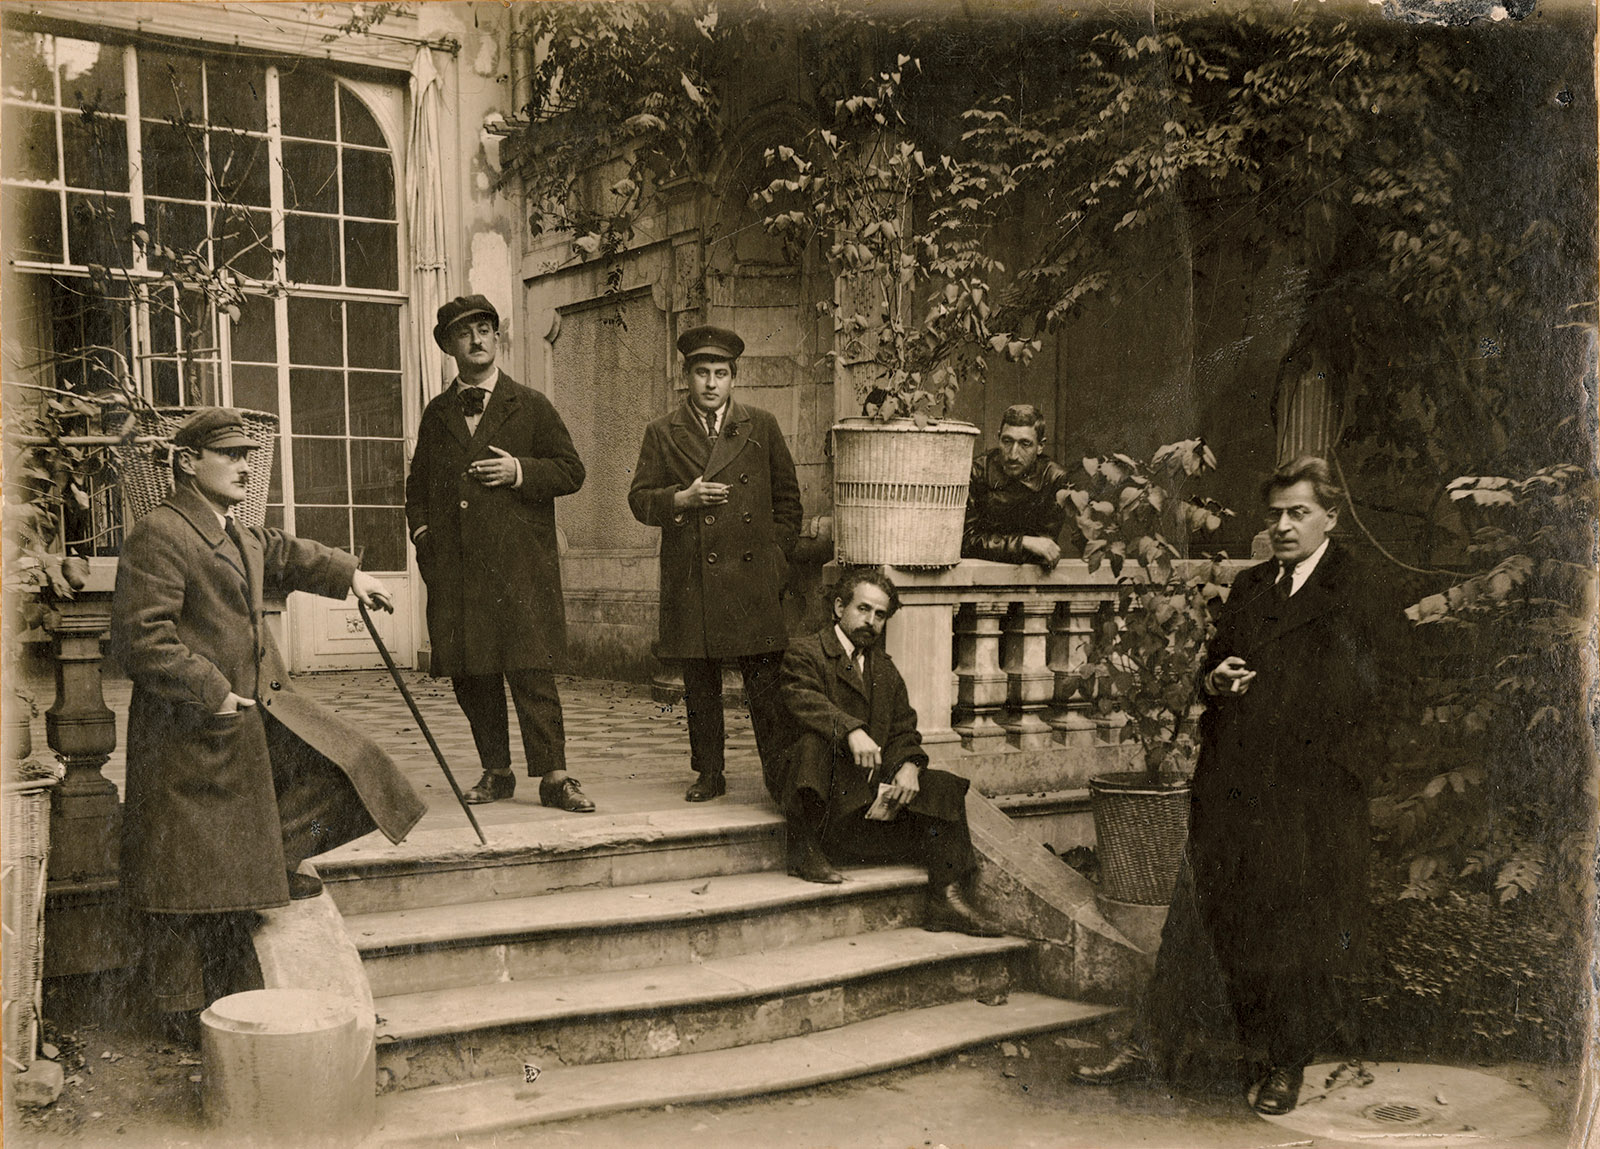 Members of the Blue Horns at the Writers’ Union of Georgia, 1923